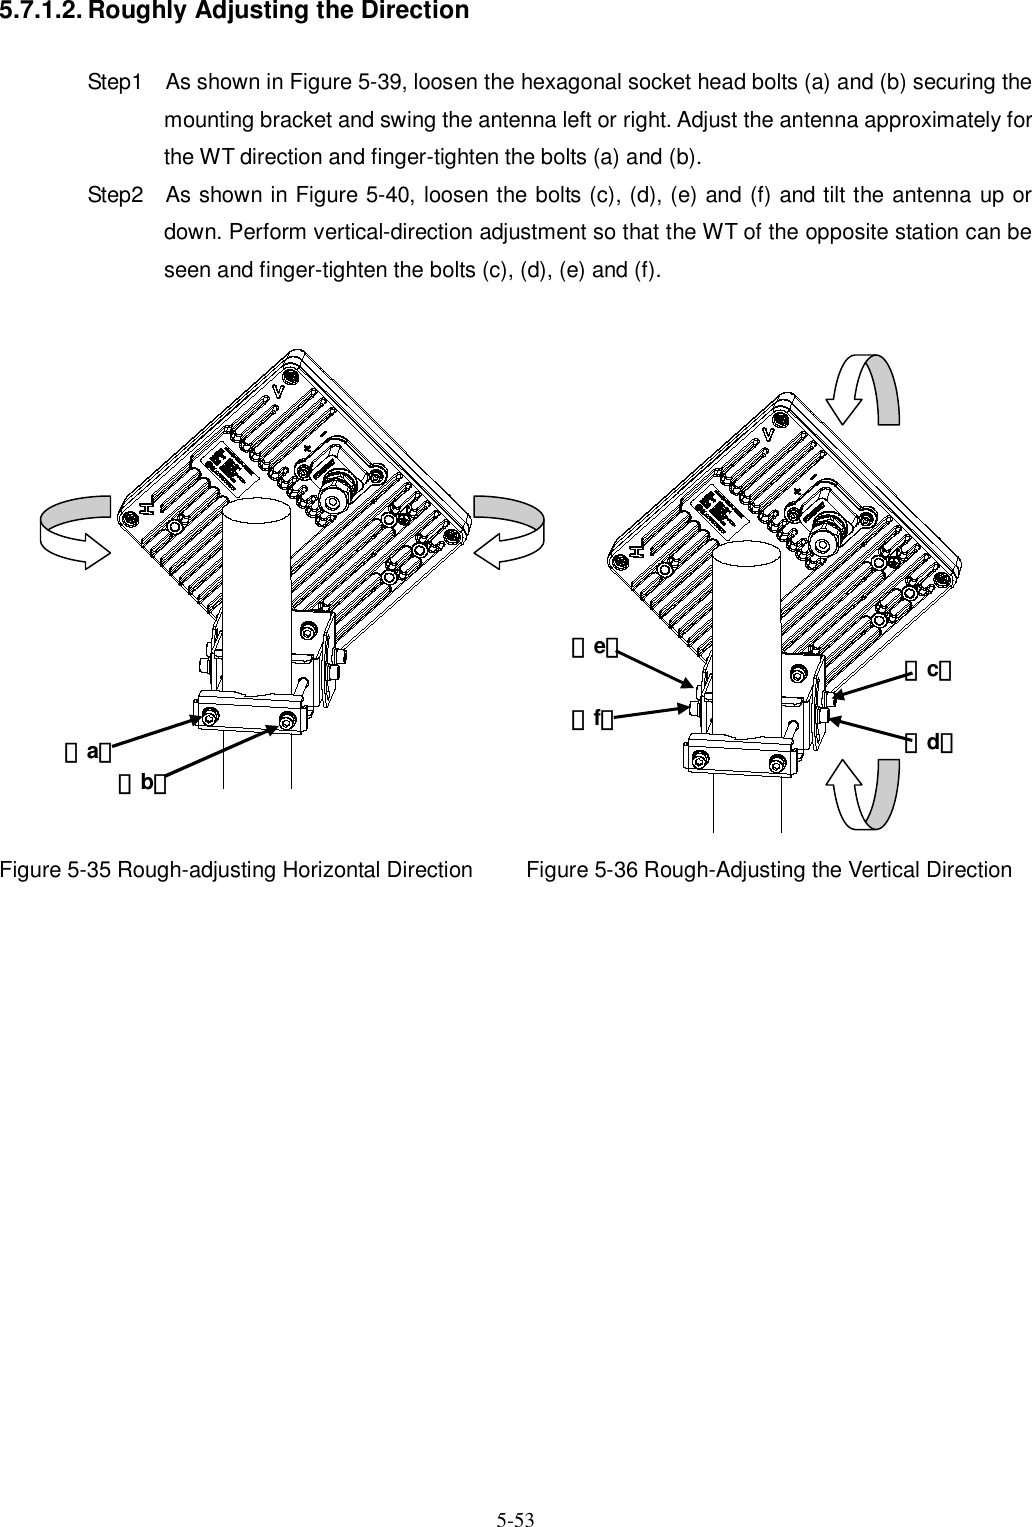   5-53 5.7.1.2. Roughly Adjusting the Direction  Step1    As shown in Figure 5-39, loosen the hexagonal socket head bolts (a) and (b) securing the mounting bracket and swing the antenna left or right. Adjust the antenna approximately for the WT direction and finger-tighten the bolts (a) and (b). Step2    As shown in Figure 5-40, loosen the bolts (c), (d), (e) and (f) and tilt the antenna up or down. Perform vertical-direction adjustment so that the WT of the opposite station can be seen and finger-tighten the bolts (c), (d), (e) and (f).                Figure 5-35 Rough-adjusting Horizontal Direction  Figure 5-36 Rough-Adjusting the Vertical Direction                垂直偏波 （a） （b）（d） （c） （e） （f） 